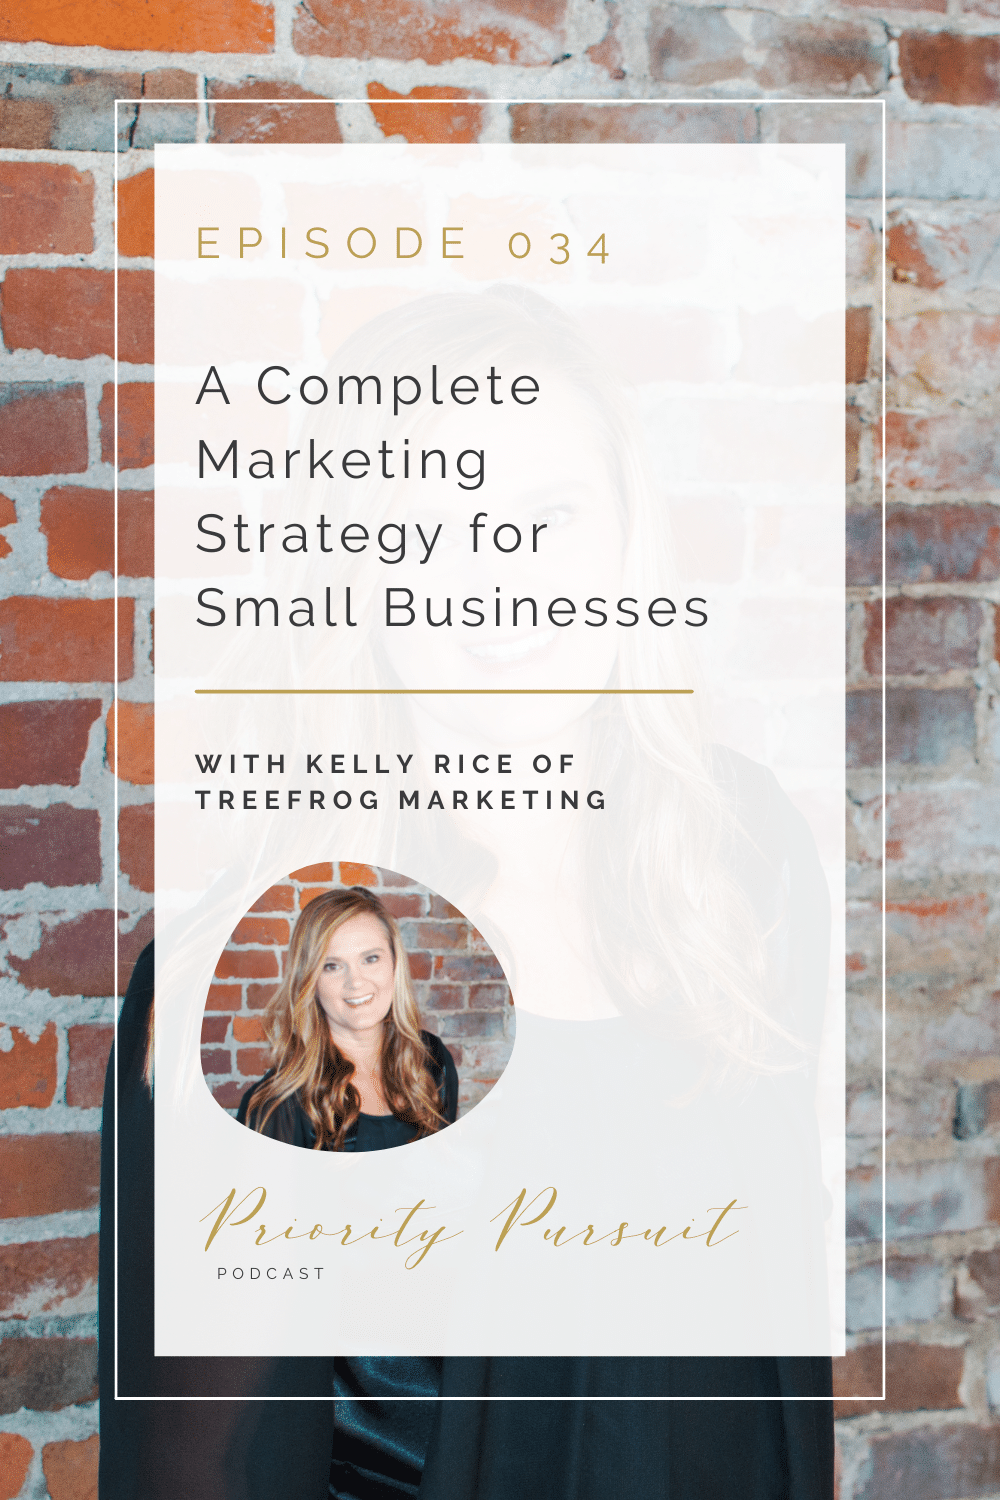 Victoria Rayburn and Treefrog Marketing Founder and Chief Marketing Strategist Kelly Rice break down a complete marketing strategy for small businesses. 